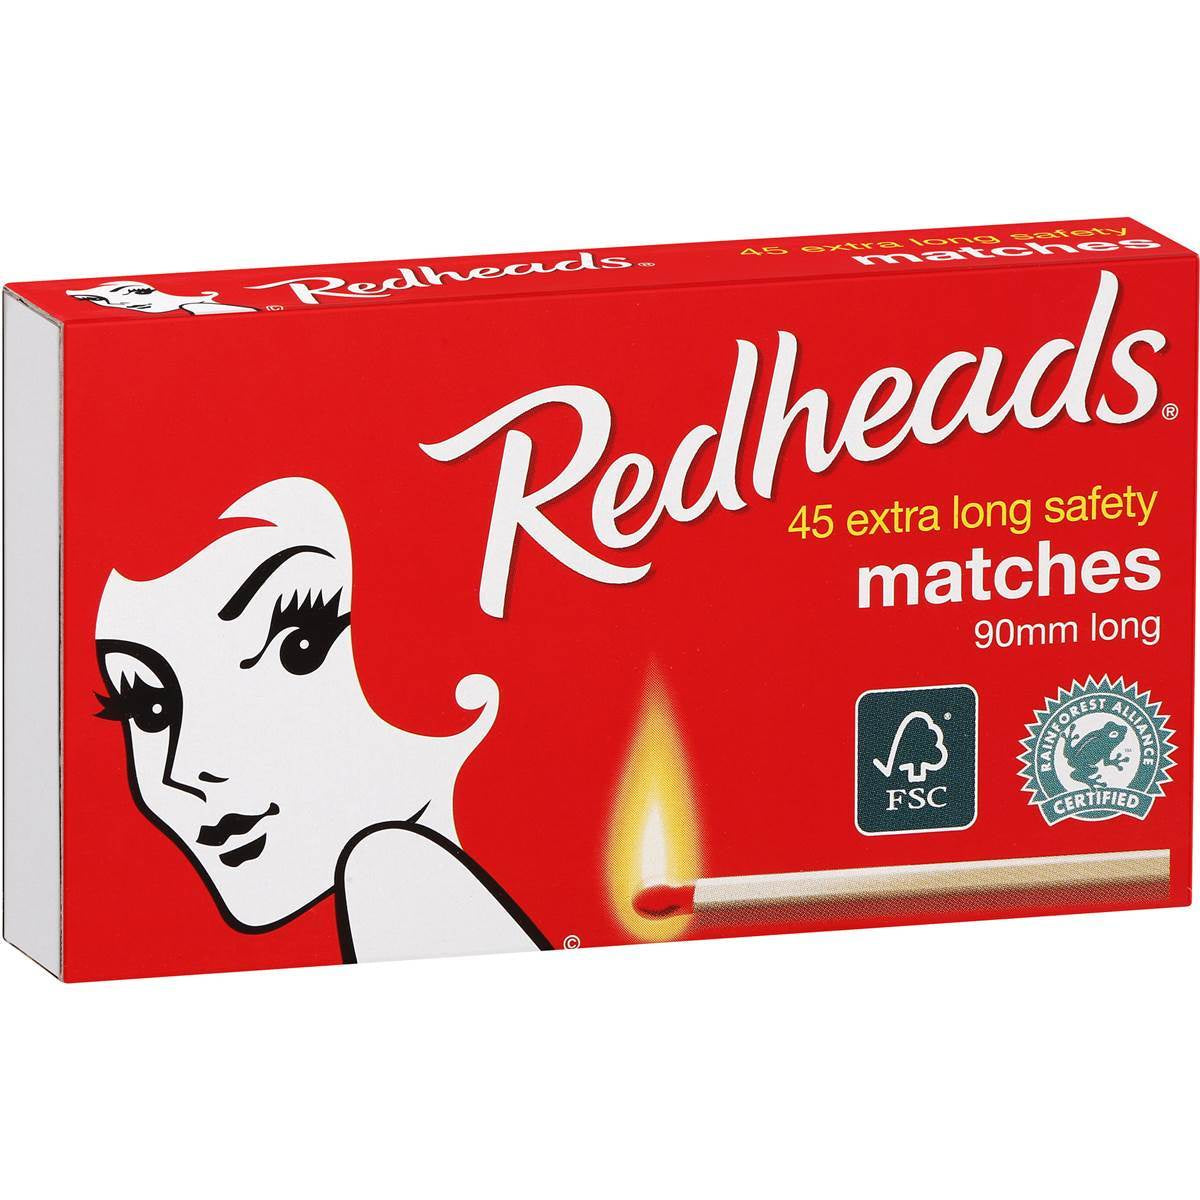 Redheads Matches Extra Long 45pk